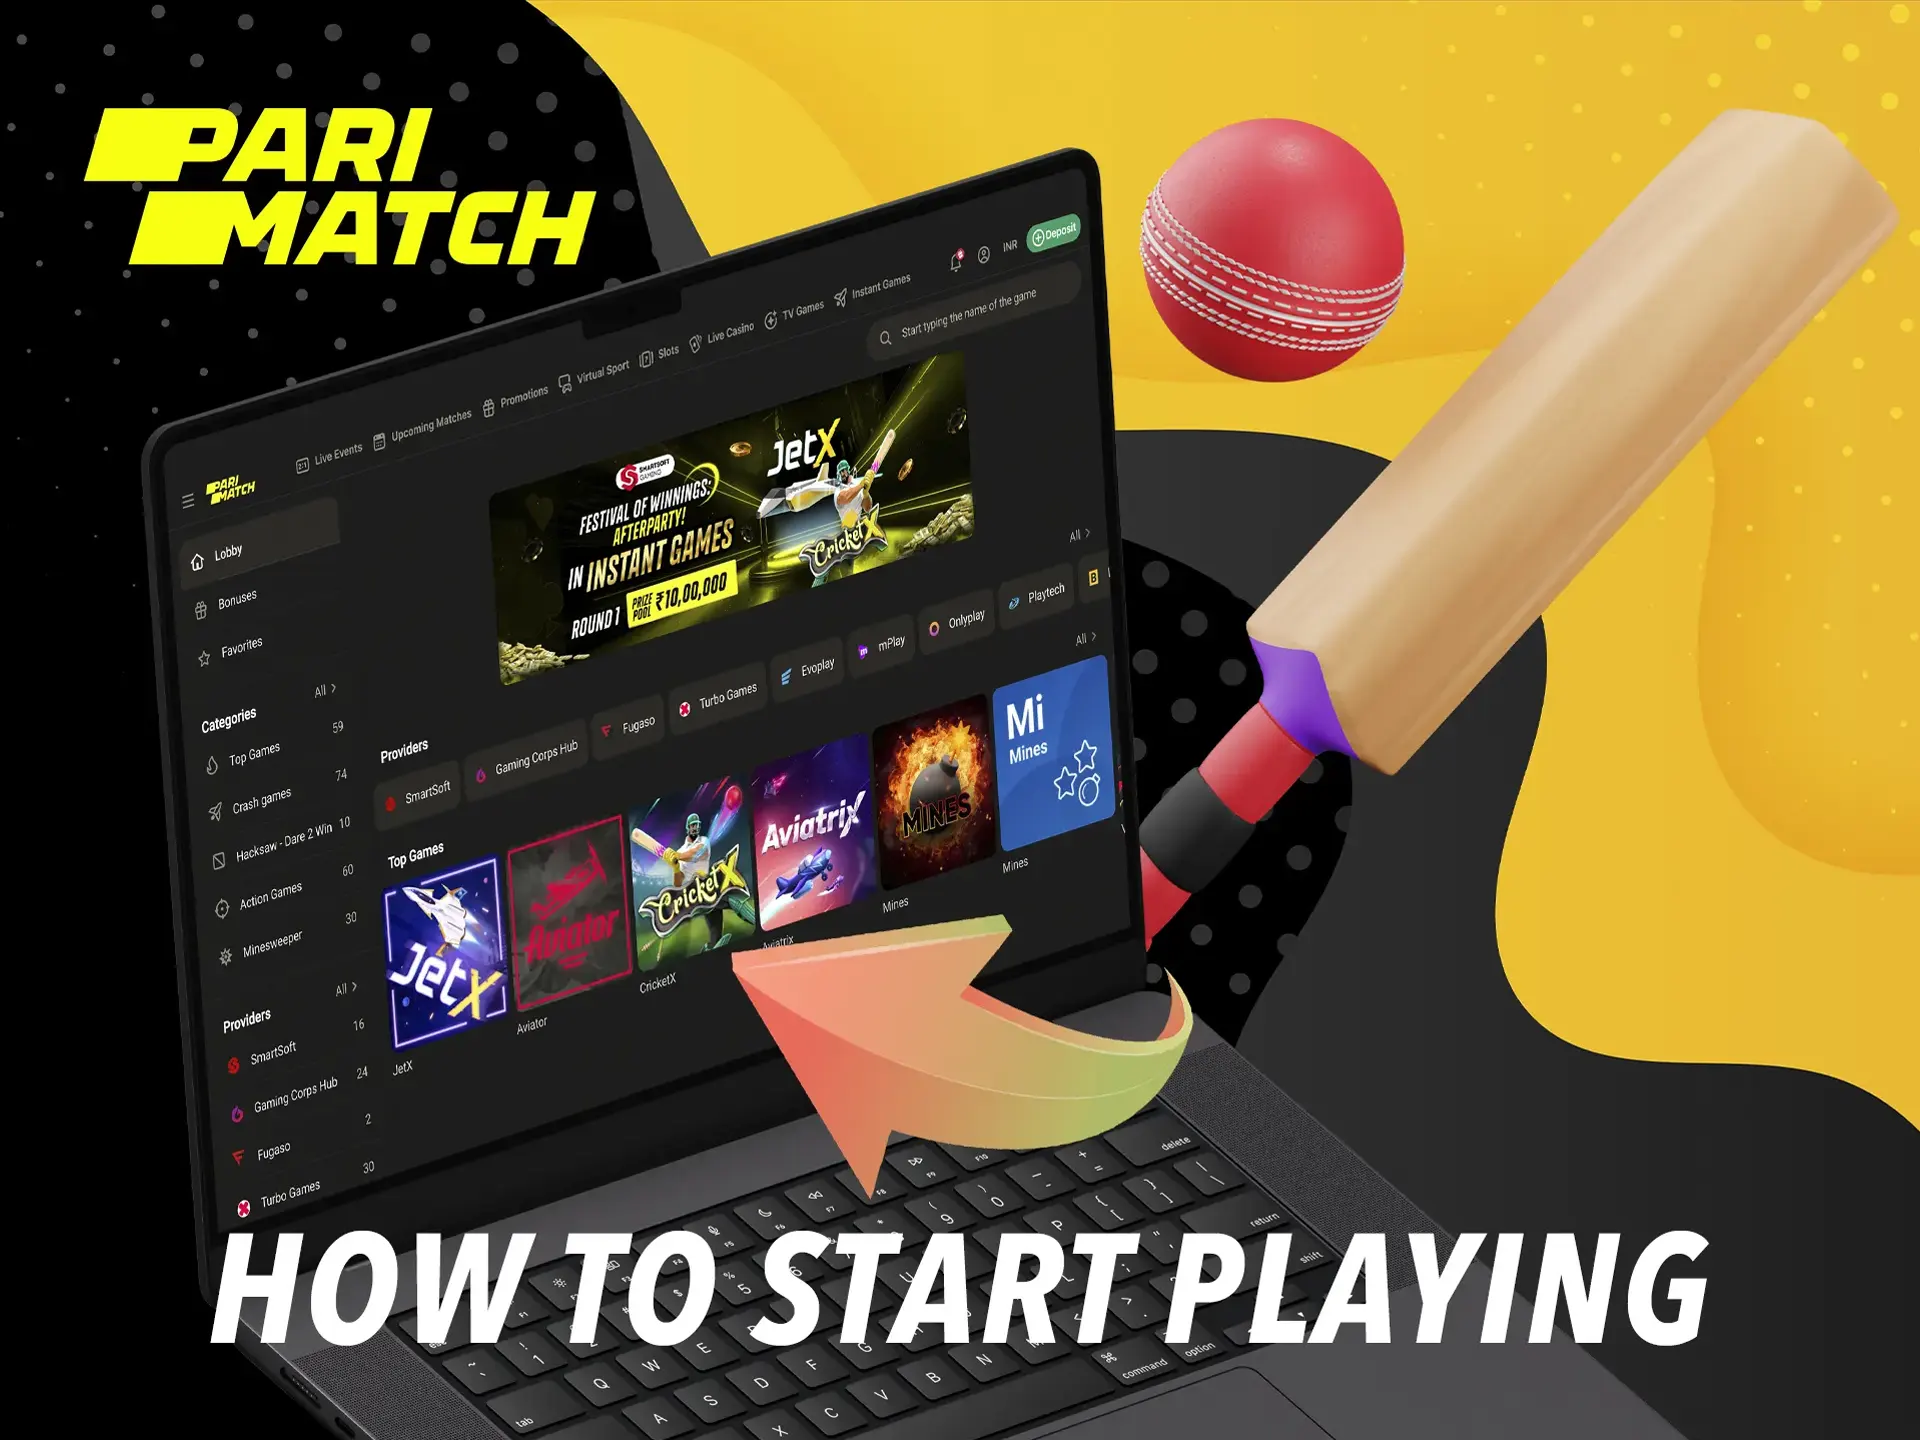 Launch the Cricket X game, place your first bet and enjoy the graphics and the emotion of winning.